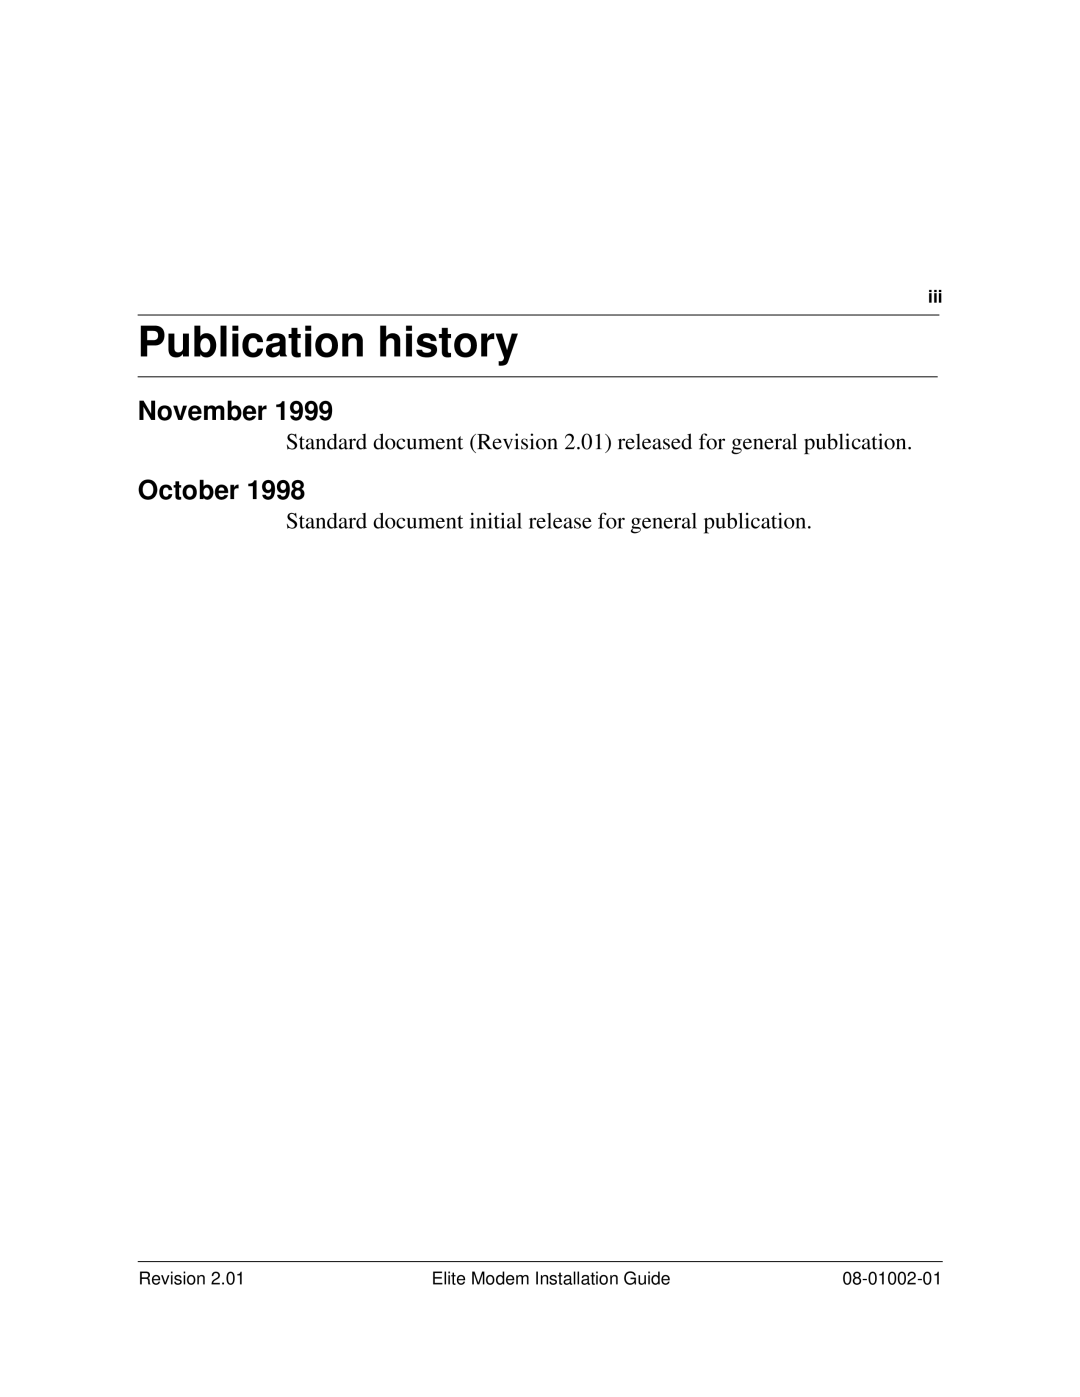 Zhone Technologies 08-01002-01 manual Publication history, Standard document Revision 2.01 released for general publication 